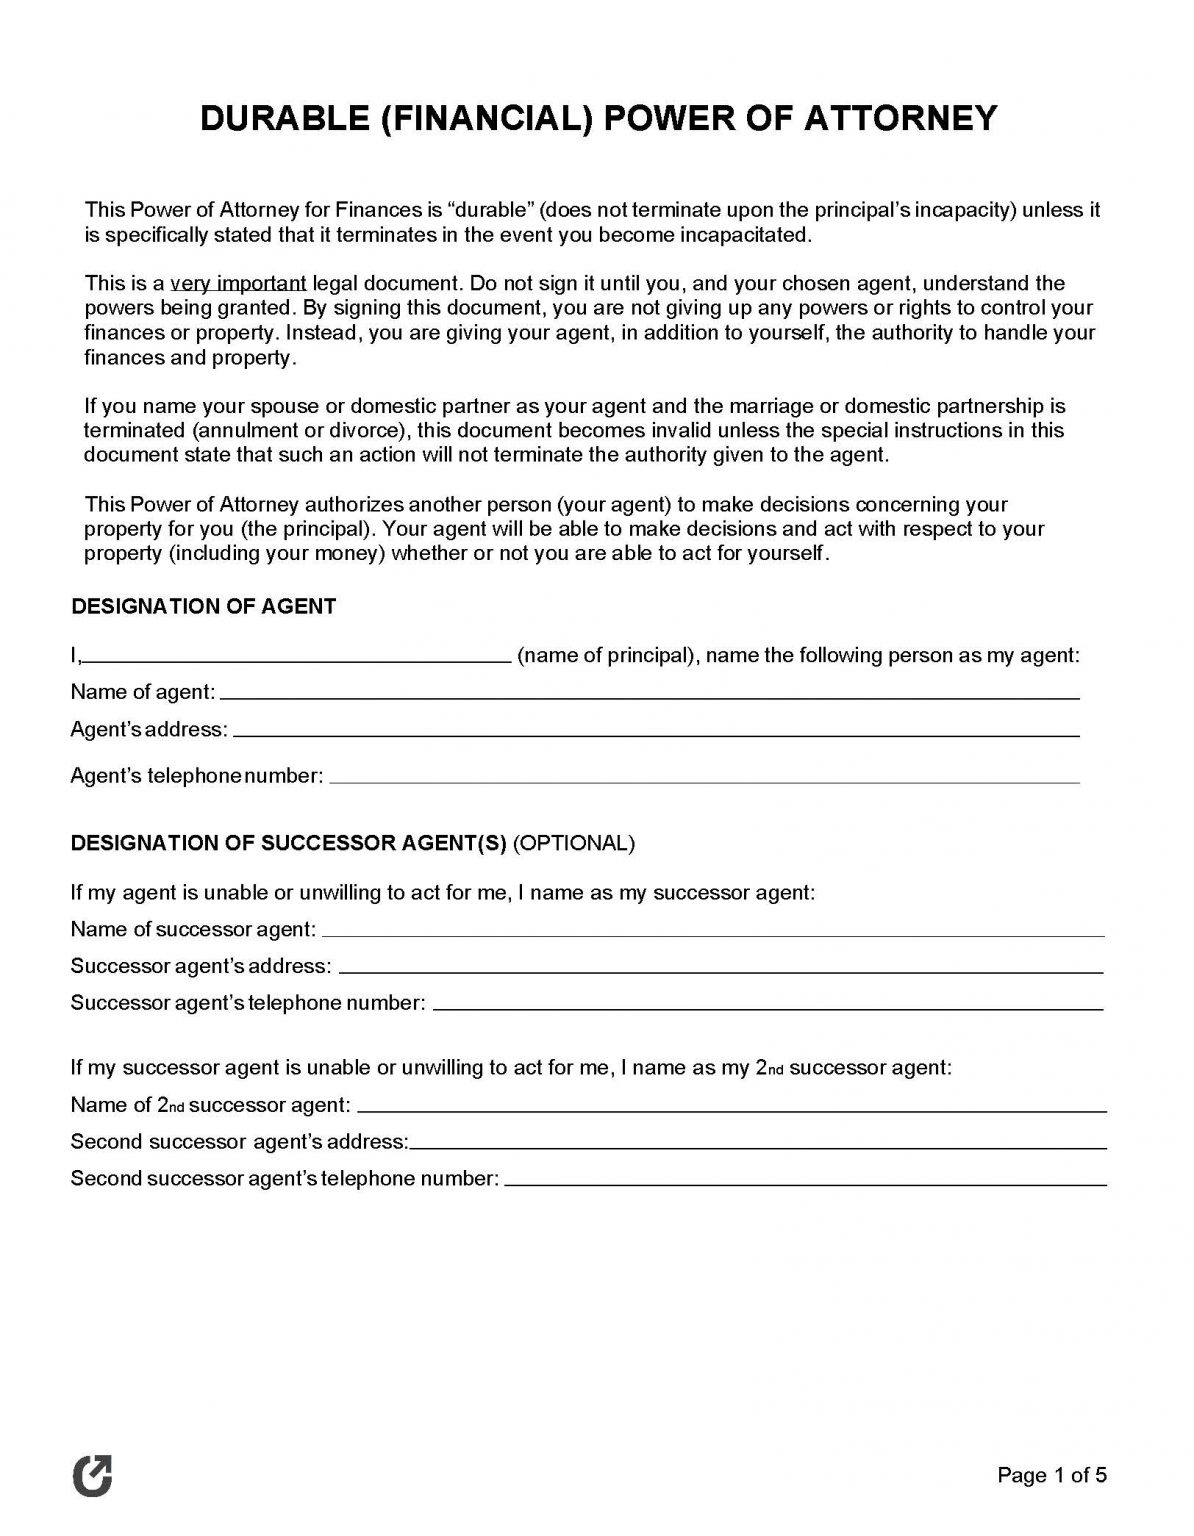 free-printable-durable-power-of-attorney-form-kentucky